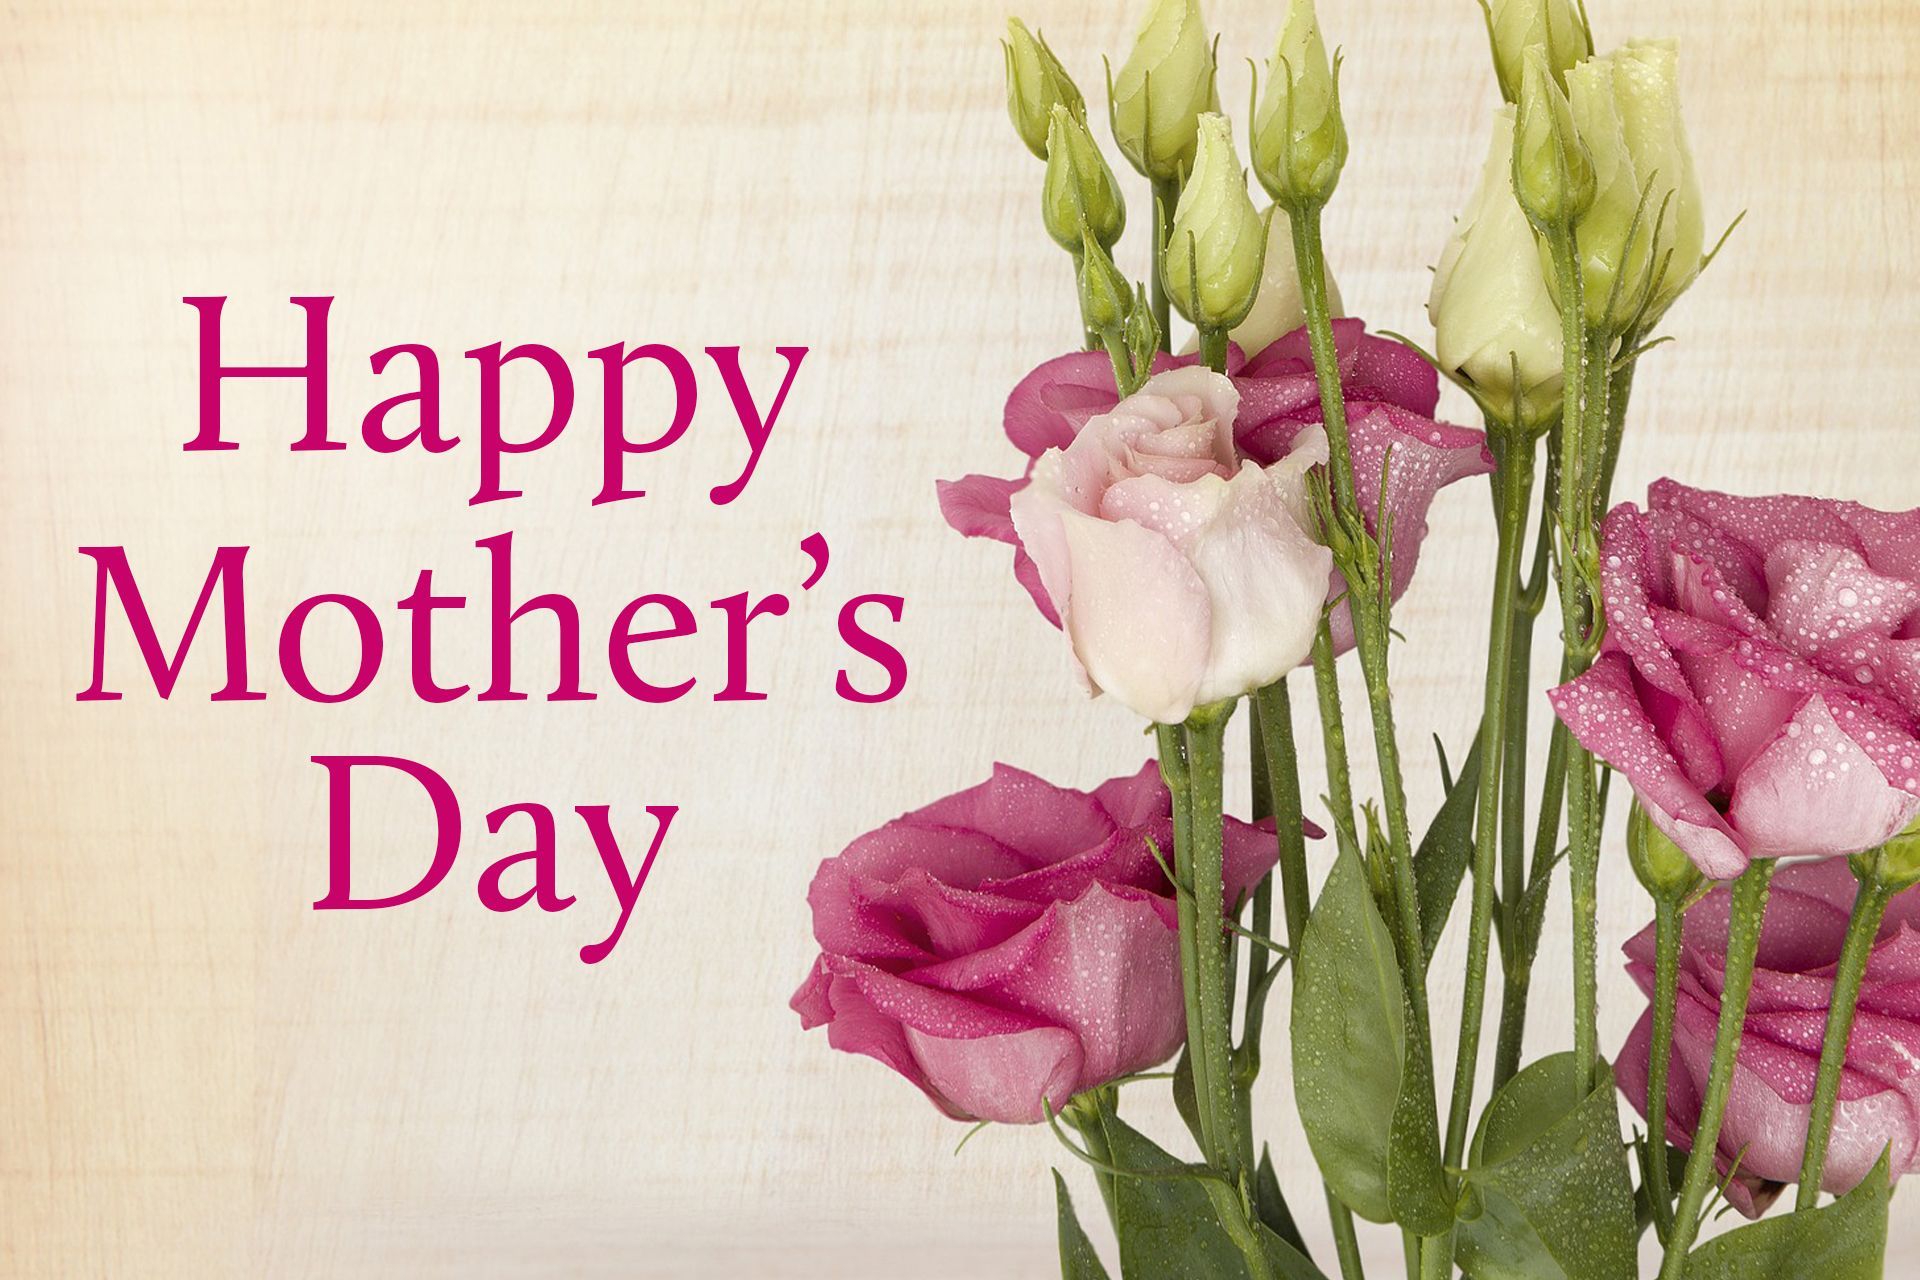 Happy Mothers Day Image, Picture, HD Wallpaper & Photo 2019